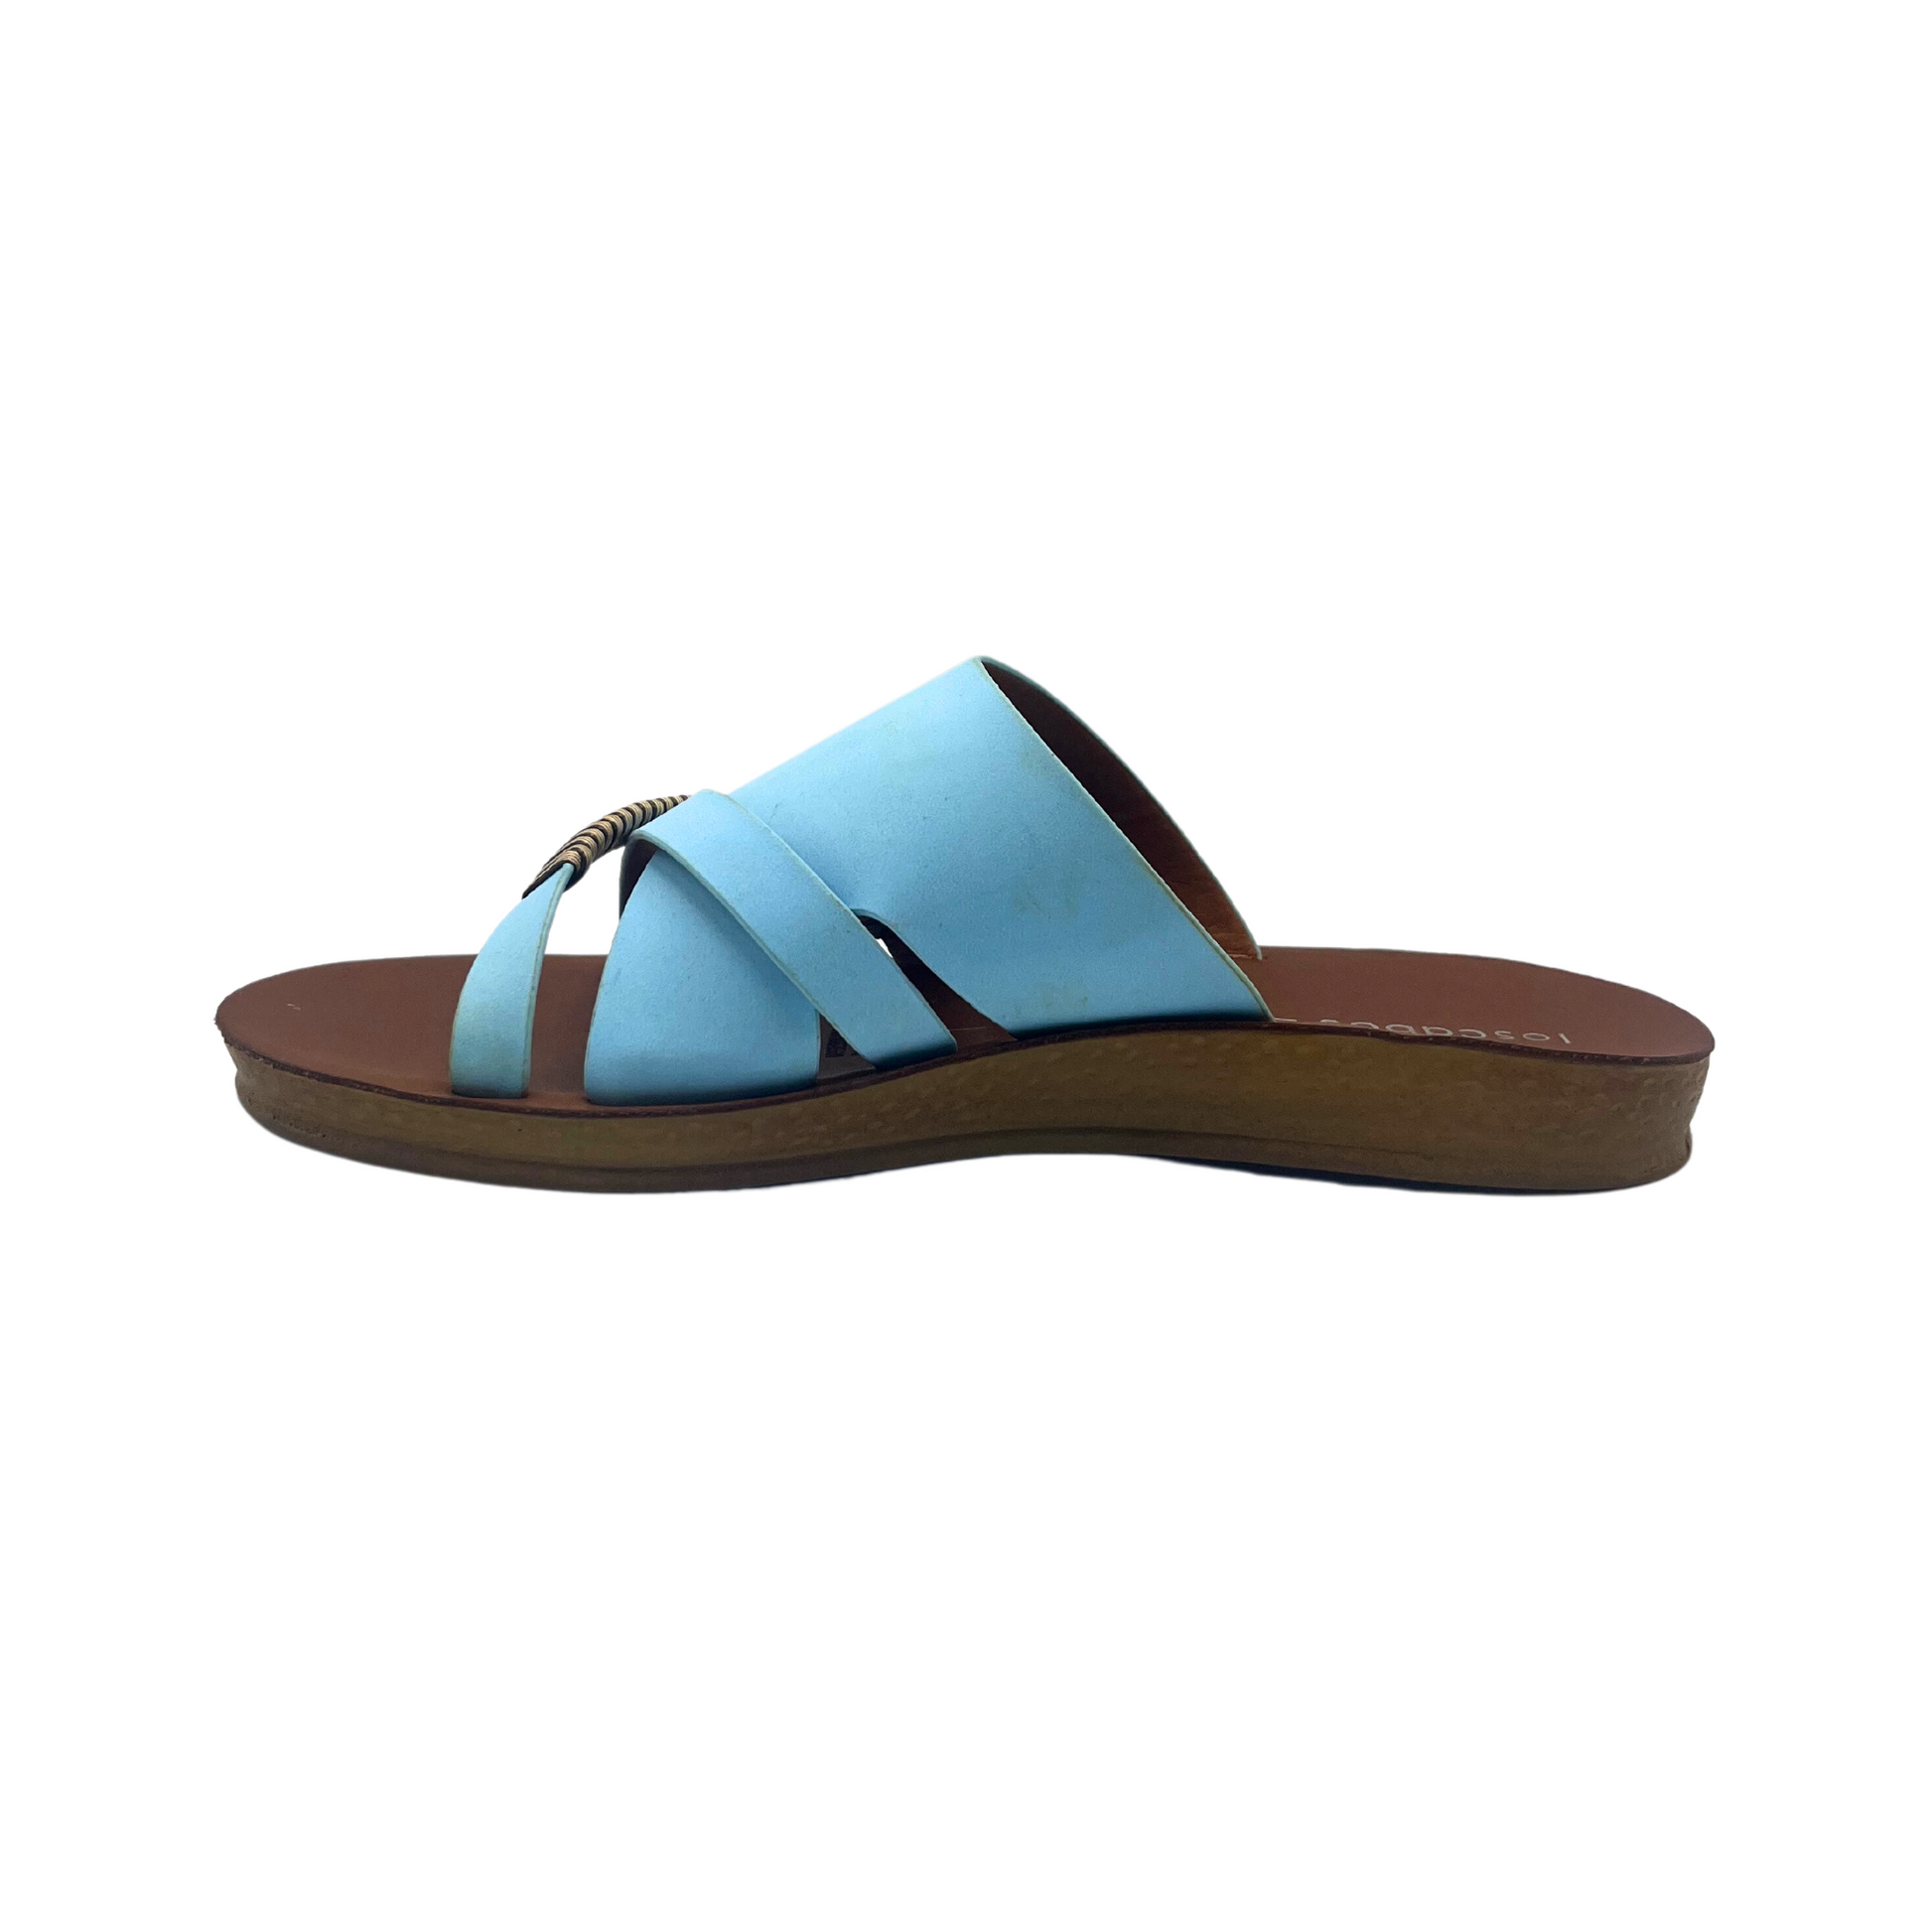 Inside view of a slip on sandal.  Footbed has an ergonomic shape to add comfort and support